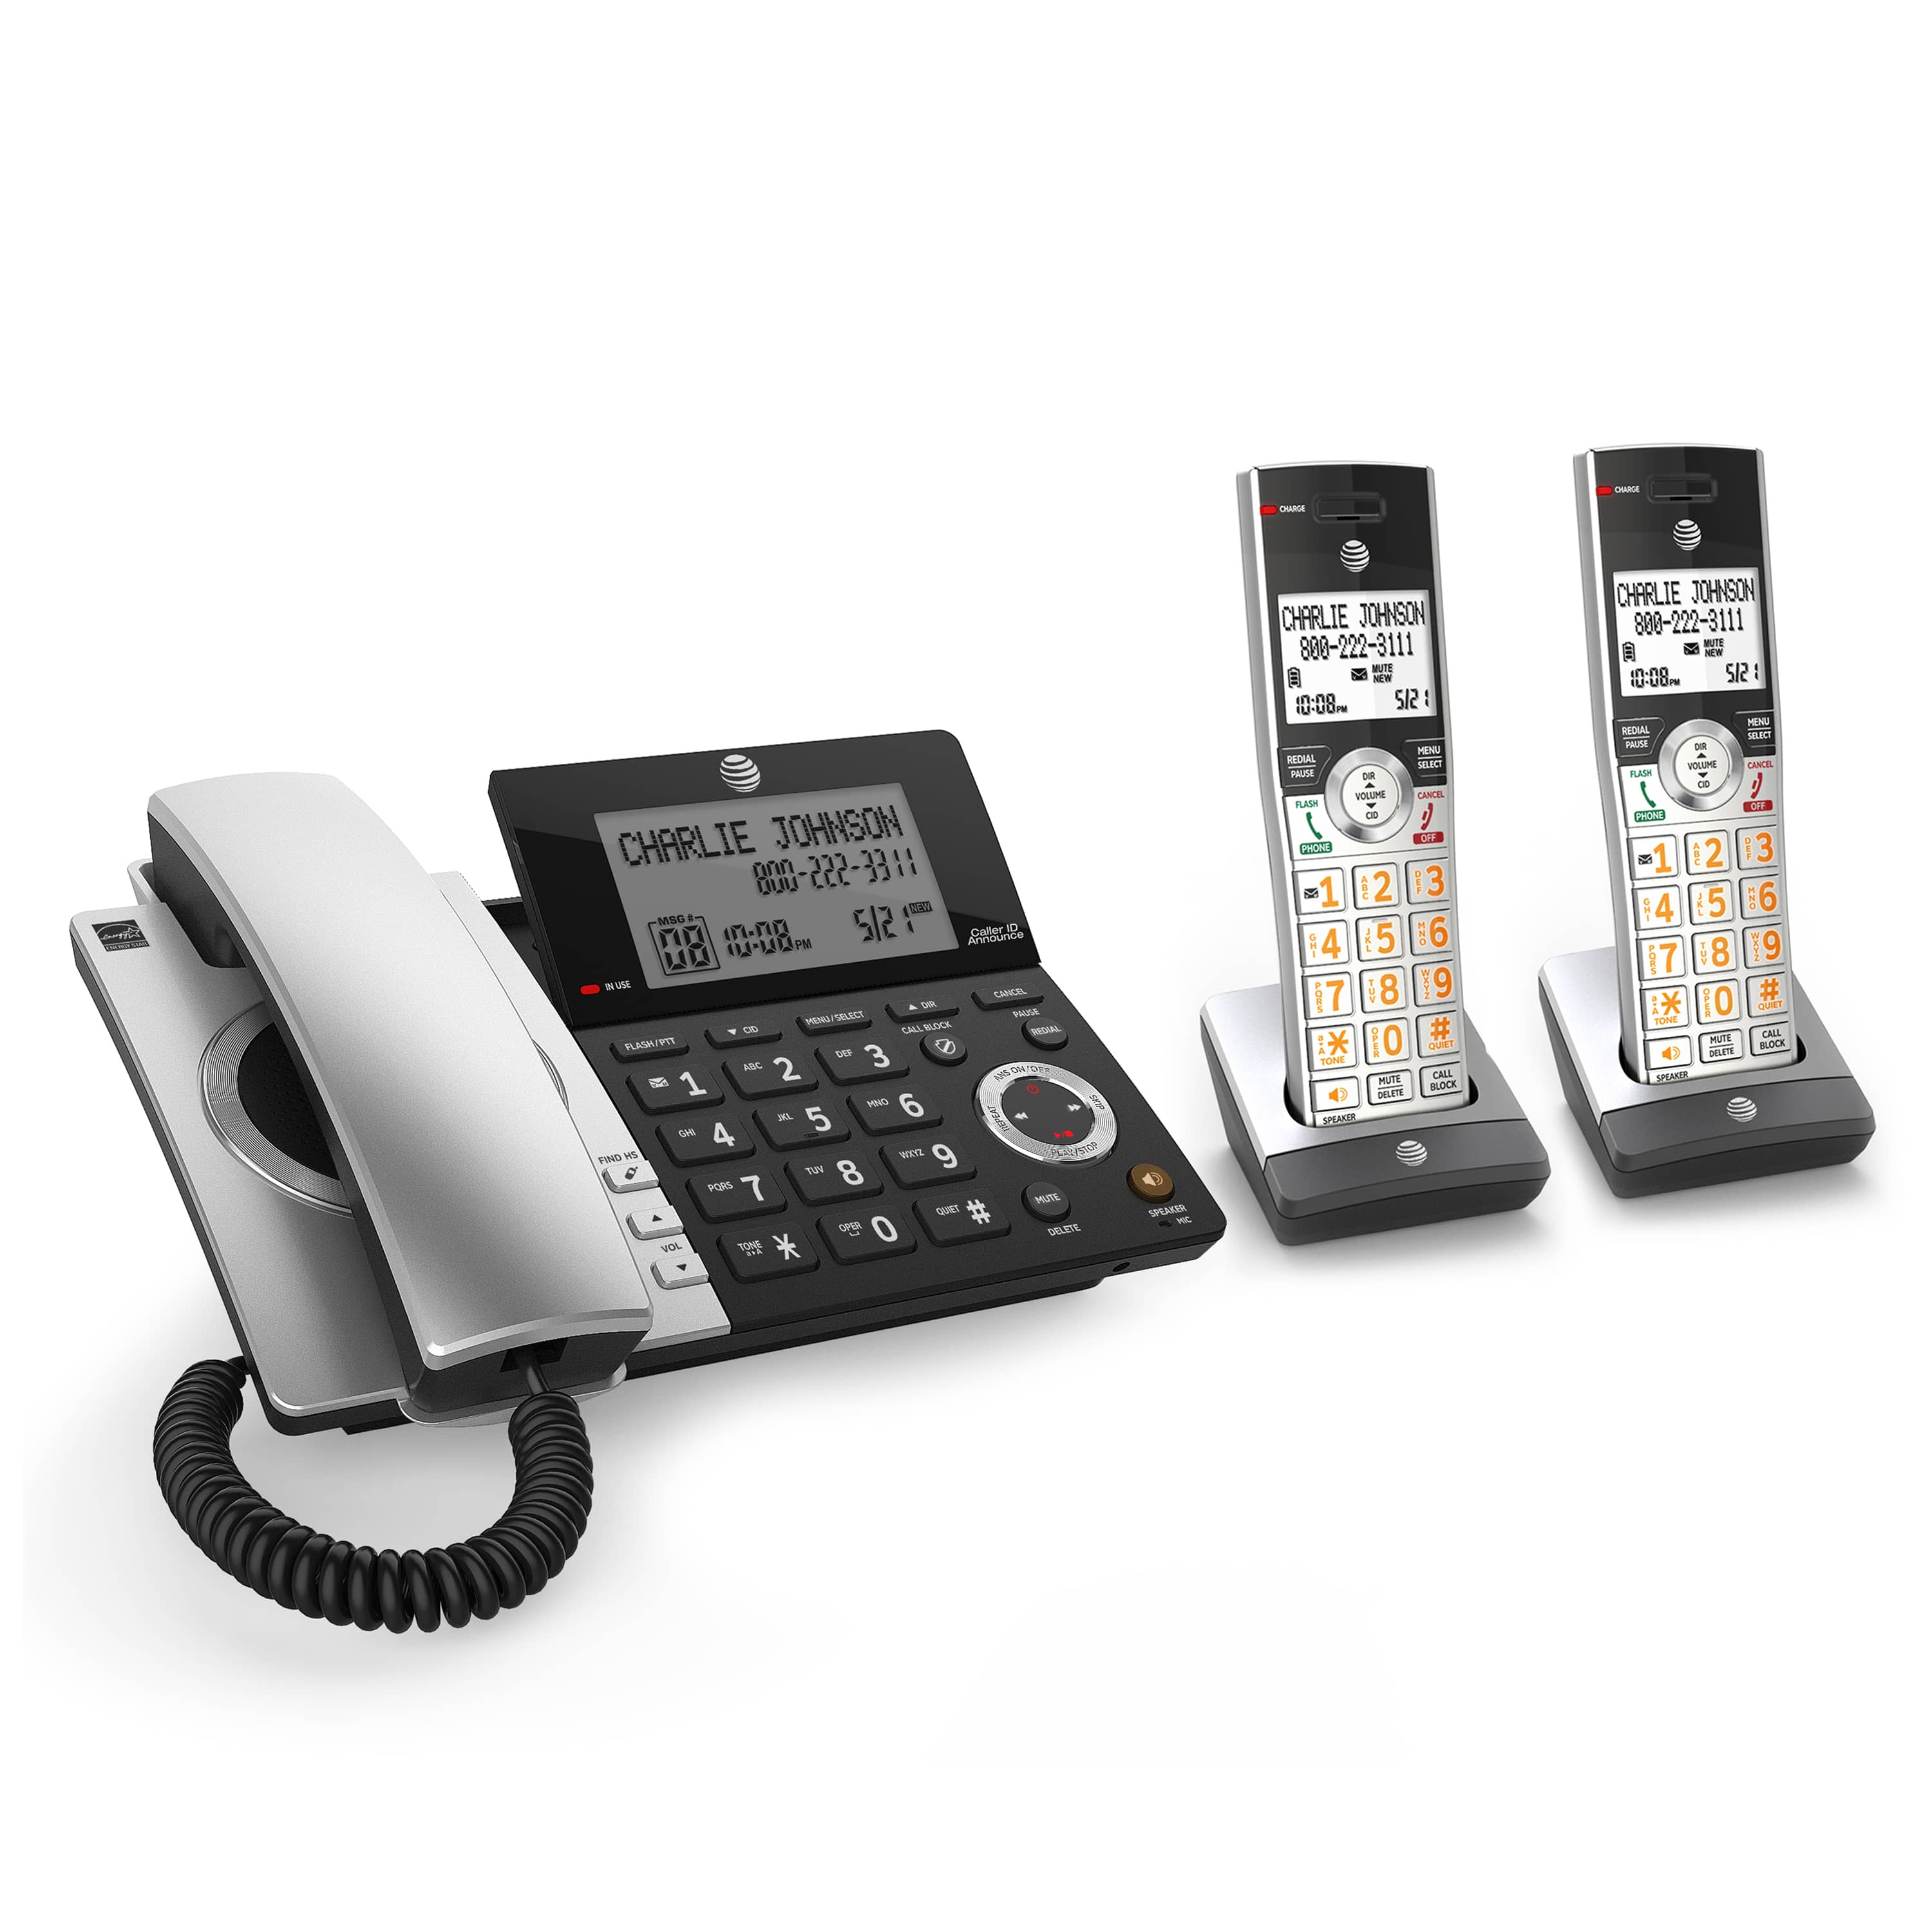 2 handset corded/cordless phone system with smart call blocker - view 2